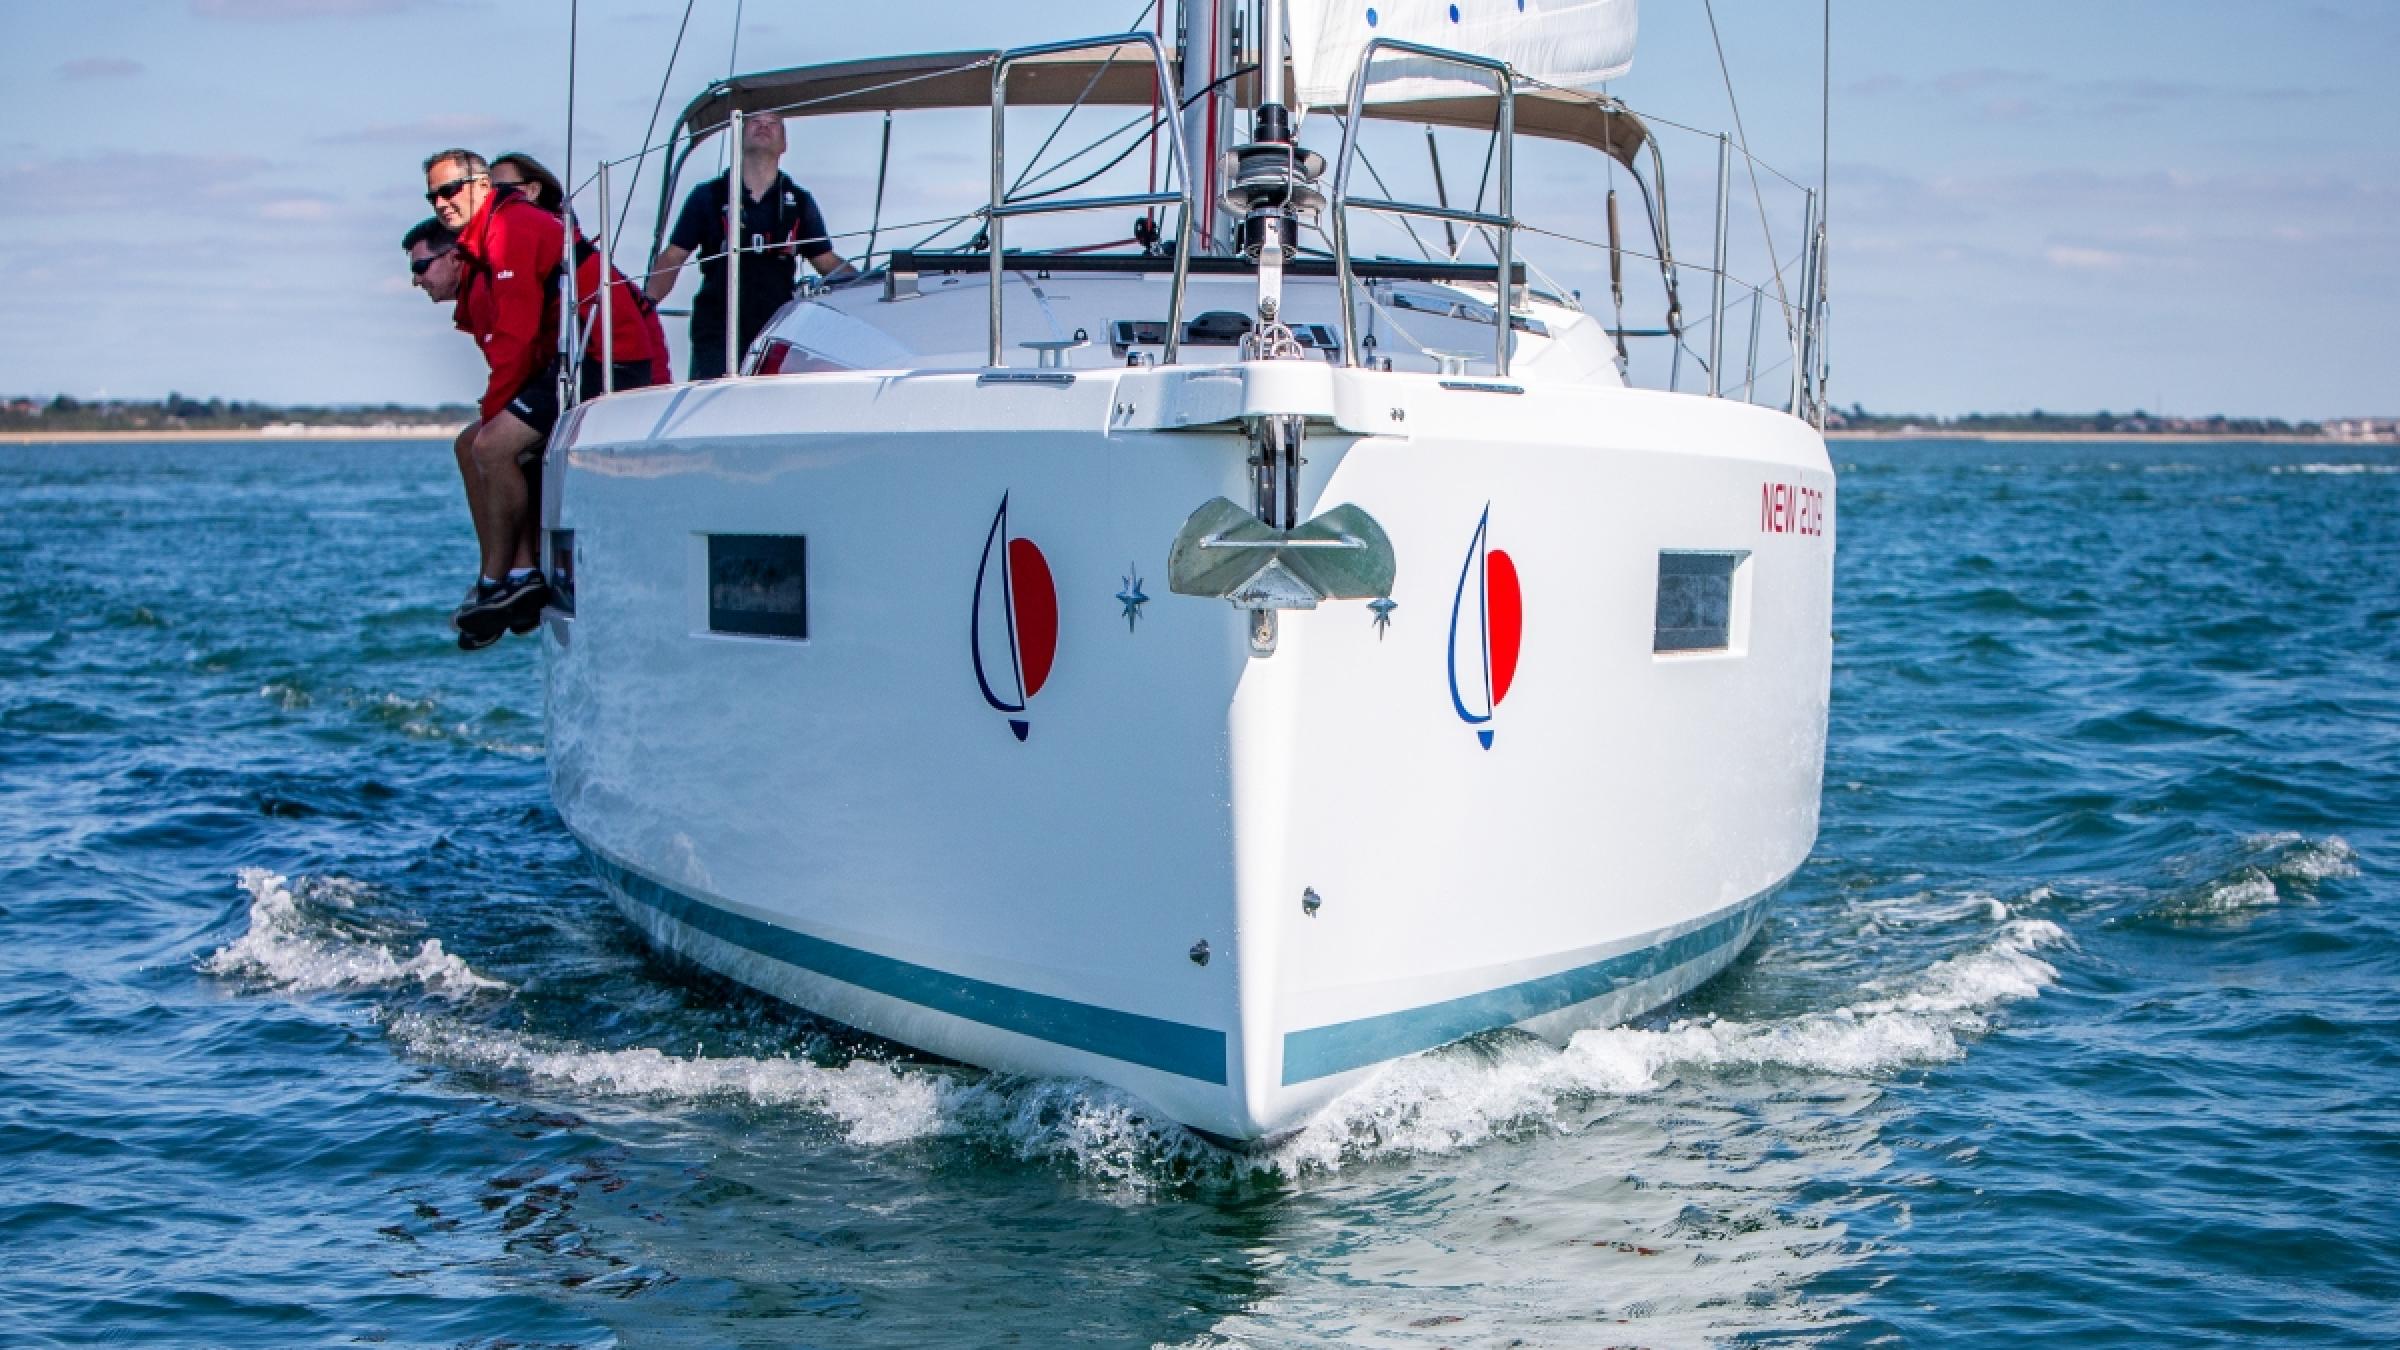 Sun Odyssey 41 - Yacht Charter United Kingdom & Boat hire in United Kingdom England The Solent Portsmouth Portsmouth Port Solent Marina 4